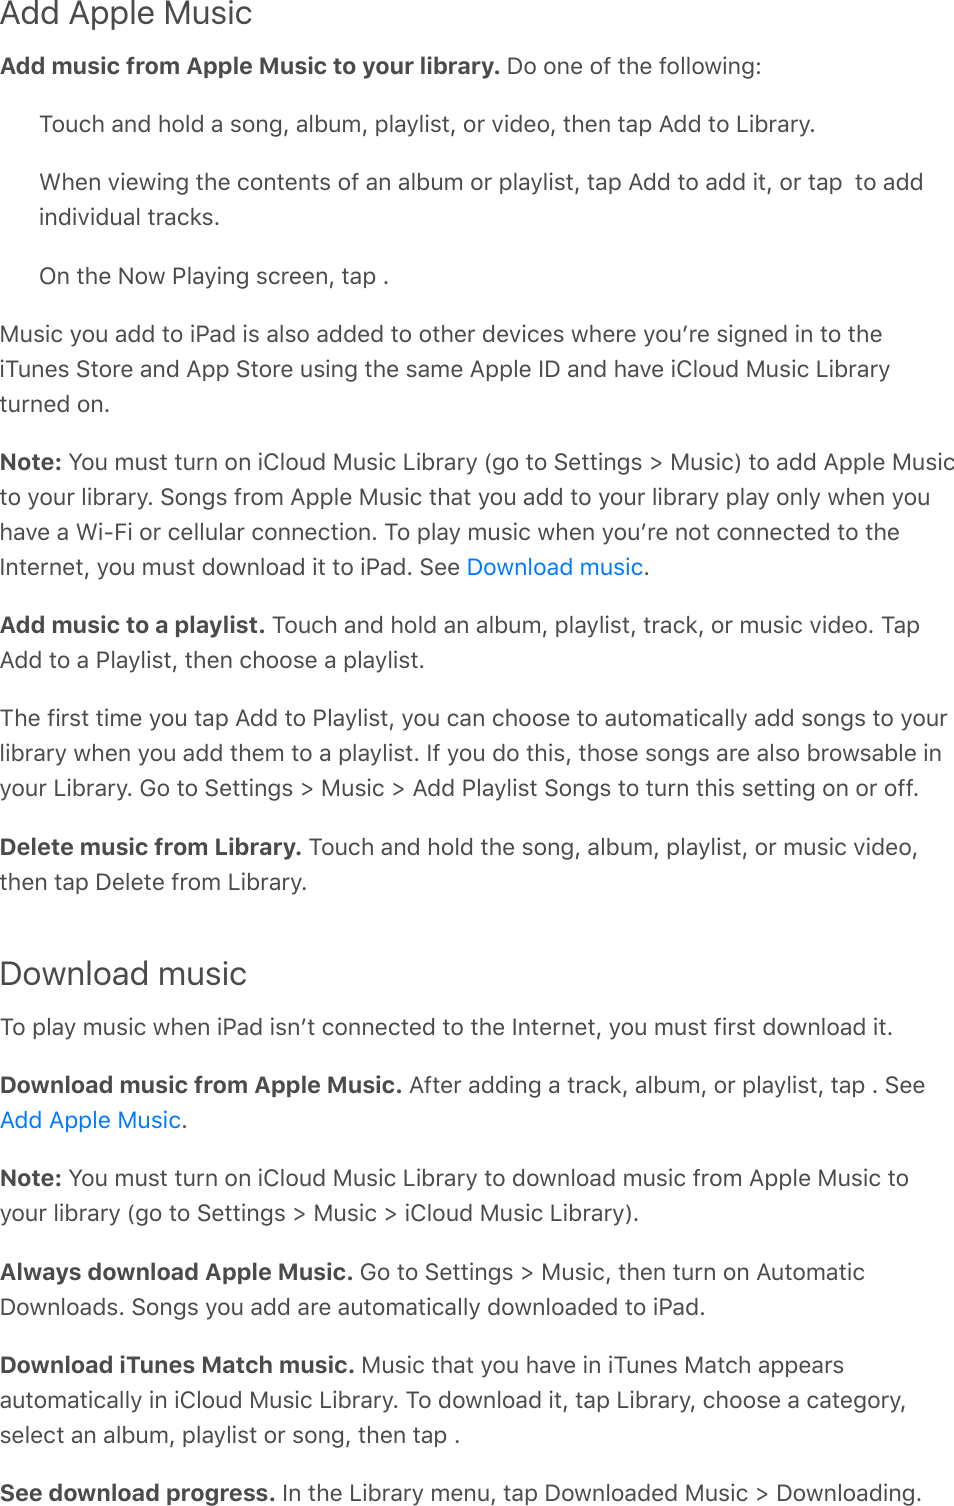 Add Apple MusicAdd music from Apple Music to your library. P2%20(%29%&quot;*(%923321.0;OM2&gt;)*%#07%*237%#%&amp;20;L%#35&gt;/L%-3#=3.&amp;&quot;L%2$%D.7(2L%&quot;*(0%&quot;#-%?77%&quot;2%V.5$#$=E&lt;*(0%D.(1.0;%&quot;*(%)20&quot;(0&quot;&amp;%29%#0%#35&gt;/%2$%-3#=3.&amp;&quot;L%&quot;#-%?77%&quot;2%#77%.&quot;L%2$%&quot;#-%%&quot;2%#77.07.D.7&gt;#3%&quot;$#)&apos;&amp;EG0%&quot;*(%C21%@3#=.0;%&amp;)$((0L%&quot;#-%E8&gt;&amp;.)%=2&gt;%#77%&quot;2%.@#7%.&amp;%#3&amp;2%#77(7%&quot;2%2&quot;*($%7(D.)(&amp;%1*($(%=2&gt;F$(%&amp;.;0(7%.0%&quot;2%&quot;*(.M&gt;0(&amp;%!&quot;2$(%#07%?--%!&quot;2$(%&gt;&amp;.0;%&quot;*(%&amp;#/(%?--3(%SP%#07%*#D(%.432&gt;7%8&gt;&amp;.)%V.5$#$=&quot;&gt;$0(7%20ENote: Y2&gt;%/&gt;&amp;&quot;%&quot;&gt;$0%20%.432&gt;7%8&gt;&amp;.)%V.5$#$=%W;2%&quot;2%!(&quot;&quot;.0;&amp;%[%8&gt;&amp;.)X%&quot;2%#77%?--3(%8&gt;&amp;.)&quot;2%=2&gt;$%3.5$#$=E%!20;&amp;%9$2/%?--3(%8&gt;&amp;.)%&quot;*#&quot;%=2&gt;%#77%&quot;2%=2&gt;$%3.5$#$=%-3#=%203=%1*(0%=2&gt;*#D(%#%&lt;.QB.%2$%)(33&gt;3#$%)200()&quot;.20E%M2%-3#=%/&gt;&amp;.)%1*(0%=2&gt;F$(%02&quot;%)200()&quot;(7%&quot;2%&quot;*(S0&quot;($0(&quot;L%=2&gt;%/&gt;&amp;&quot;%721032#7%.&quot;%&quot;2%.@#7E%!((% EAdd music to a playlist. M2&gt;)*%#07%*237%#0%#35&gt;/L%-3#=3.&amp;&quot;L%&quot;$#)&apos;L%2$%/&gt;&amp;.)%D.7(2E%M#-?77%&quot;2%#%@3#=3.&amp;&quot;L%&quot;*(0%)*22&amp;(%#%-3#=3.&amp;&quot;EM*(%9.$&amp;&quot;%&quot;./(%=2&gt;%&quot;#-%?77%&quot;2%@3#=3.&amp;&quot;L%=2&gt;%)#0%)*22&amp;(%&quot;2%#&gt;&quot;2/#&quot;.)#33=%#77%&amp;20;&amp;%&quot;2%=2&gt;$3.5$#$=%1*(0%=2&gt;%#77%&quot;*(/%&quot;2%#%-3#=3.&amp;&quot;E%S9%=2&gt;%72%&quot;*.&amp;L%&quot;*2&amp;(%&amp;20;&amp;%#$(%#3&amp;2%5$21&amp;#53(%.0=2&gt;$%V.5$#$=E%62%&quot;2%!(&quot;&quot;.0;&amp;%[%8&gt;&amp;.)%[%?77%@3#=3.&amp;&quot;%!20;&amp;%&quot;2%&quot;&gt;$0%&quot;*.&amp;%&amp;(&quot;&quot;.0;%20%2$%299EDelete music from Library. M2&gt;)*%#07%*237%&quot;*(%&amp;20;L%#35&gt;/L%-3#=3.&amp;&quot;L%2$%/&gt;&amp;.)%D.7(2L&quot;*(0%&quot;#-%P(3(&quot;(%9$2/%V.5$#$=EDownload musicM2%-3#=%/&gt;&amp;.)%1*(0%.@#7%.&amp;0F&quot;%)200()&quot;(7%&quot;2%&quot;*(%S0&quot;($0(&quot;L%=2&gt;%/&gt;&amp;&quot;%9.$&amp;&quot;%721032#7%.&quot;EDownload music from Apple Music. ?9&quot;($%#77.0;%#%&quot;$#)&apos;L%#35&gt;/L%2$%-3#=3.&amp;&quot;L%&quot;#-%E%!((ENote: Y2&gt;%/&gt;&amp;&quot;%&quot;&gt;$0%20%.432&gt;7%8&gt;&amp;.)%V.5$#$=%&quot;2%721032#7%/&gt;&amp;.)%9$2/%?--3(%8&gt;&amp;.)%&quot;2=2&gt;$%3.5$#$=%W;2%&quot;2%!(&quot;&quot;.0;&amp;%[%8&gt;&amp;.)%[%.432&gt;7%8&gt;&amp;.)%V.5$#$=XEAlways download Apple Music. 62%&quot;2%!(&quot;&quot;.0;&amp;%[%8&gt;&amp;.)L%&quot;*(0%&quot;&gt;$0%20%?&gt;&quot;2/#&quot;.)P21032#7&amp;E%!20;&amp;%=2&gt;%#77%#$(%#&gt;&quot;2/#&quot;.)#33=%721032#7(7%&quot;2%.@#7EDownload iTunes Match music. 8&gt;&amp;.)%&quot;*#&quot;%=2&gt;%*#D(%.0%.M&gt;0(&amp;%8#&quot;)*%#--(#$&amp;#&gt;&quot;2/#&quot;.)#33=%.0%.432&gt;7%8&gt;&amp;.)%V.5$#$=E%M2%721032#7%.&quot;L%&quot;#-%V.5$#$=L%)*22&amp;(%#%)#&quot;(;2$=L&amp;(3()&quot;%#0%#35&gt;/L%-3#=3.&amp;&quot;%2$%&amp;20;L%&quot;*(0%&quot;#-%ESee download progress. S0%&quot;*(%V.5$#$=%/(0&gt;L%&quot;#-%P21032#7(7%8&gt;&amp;.)%[%P21032#7.0;EP21032#7%/&gt;&amp;.)?77%?--3(%8&gt;&amp;.)